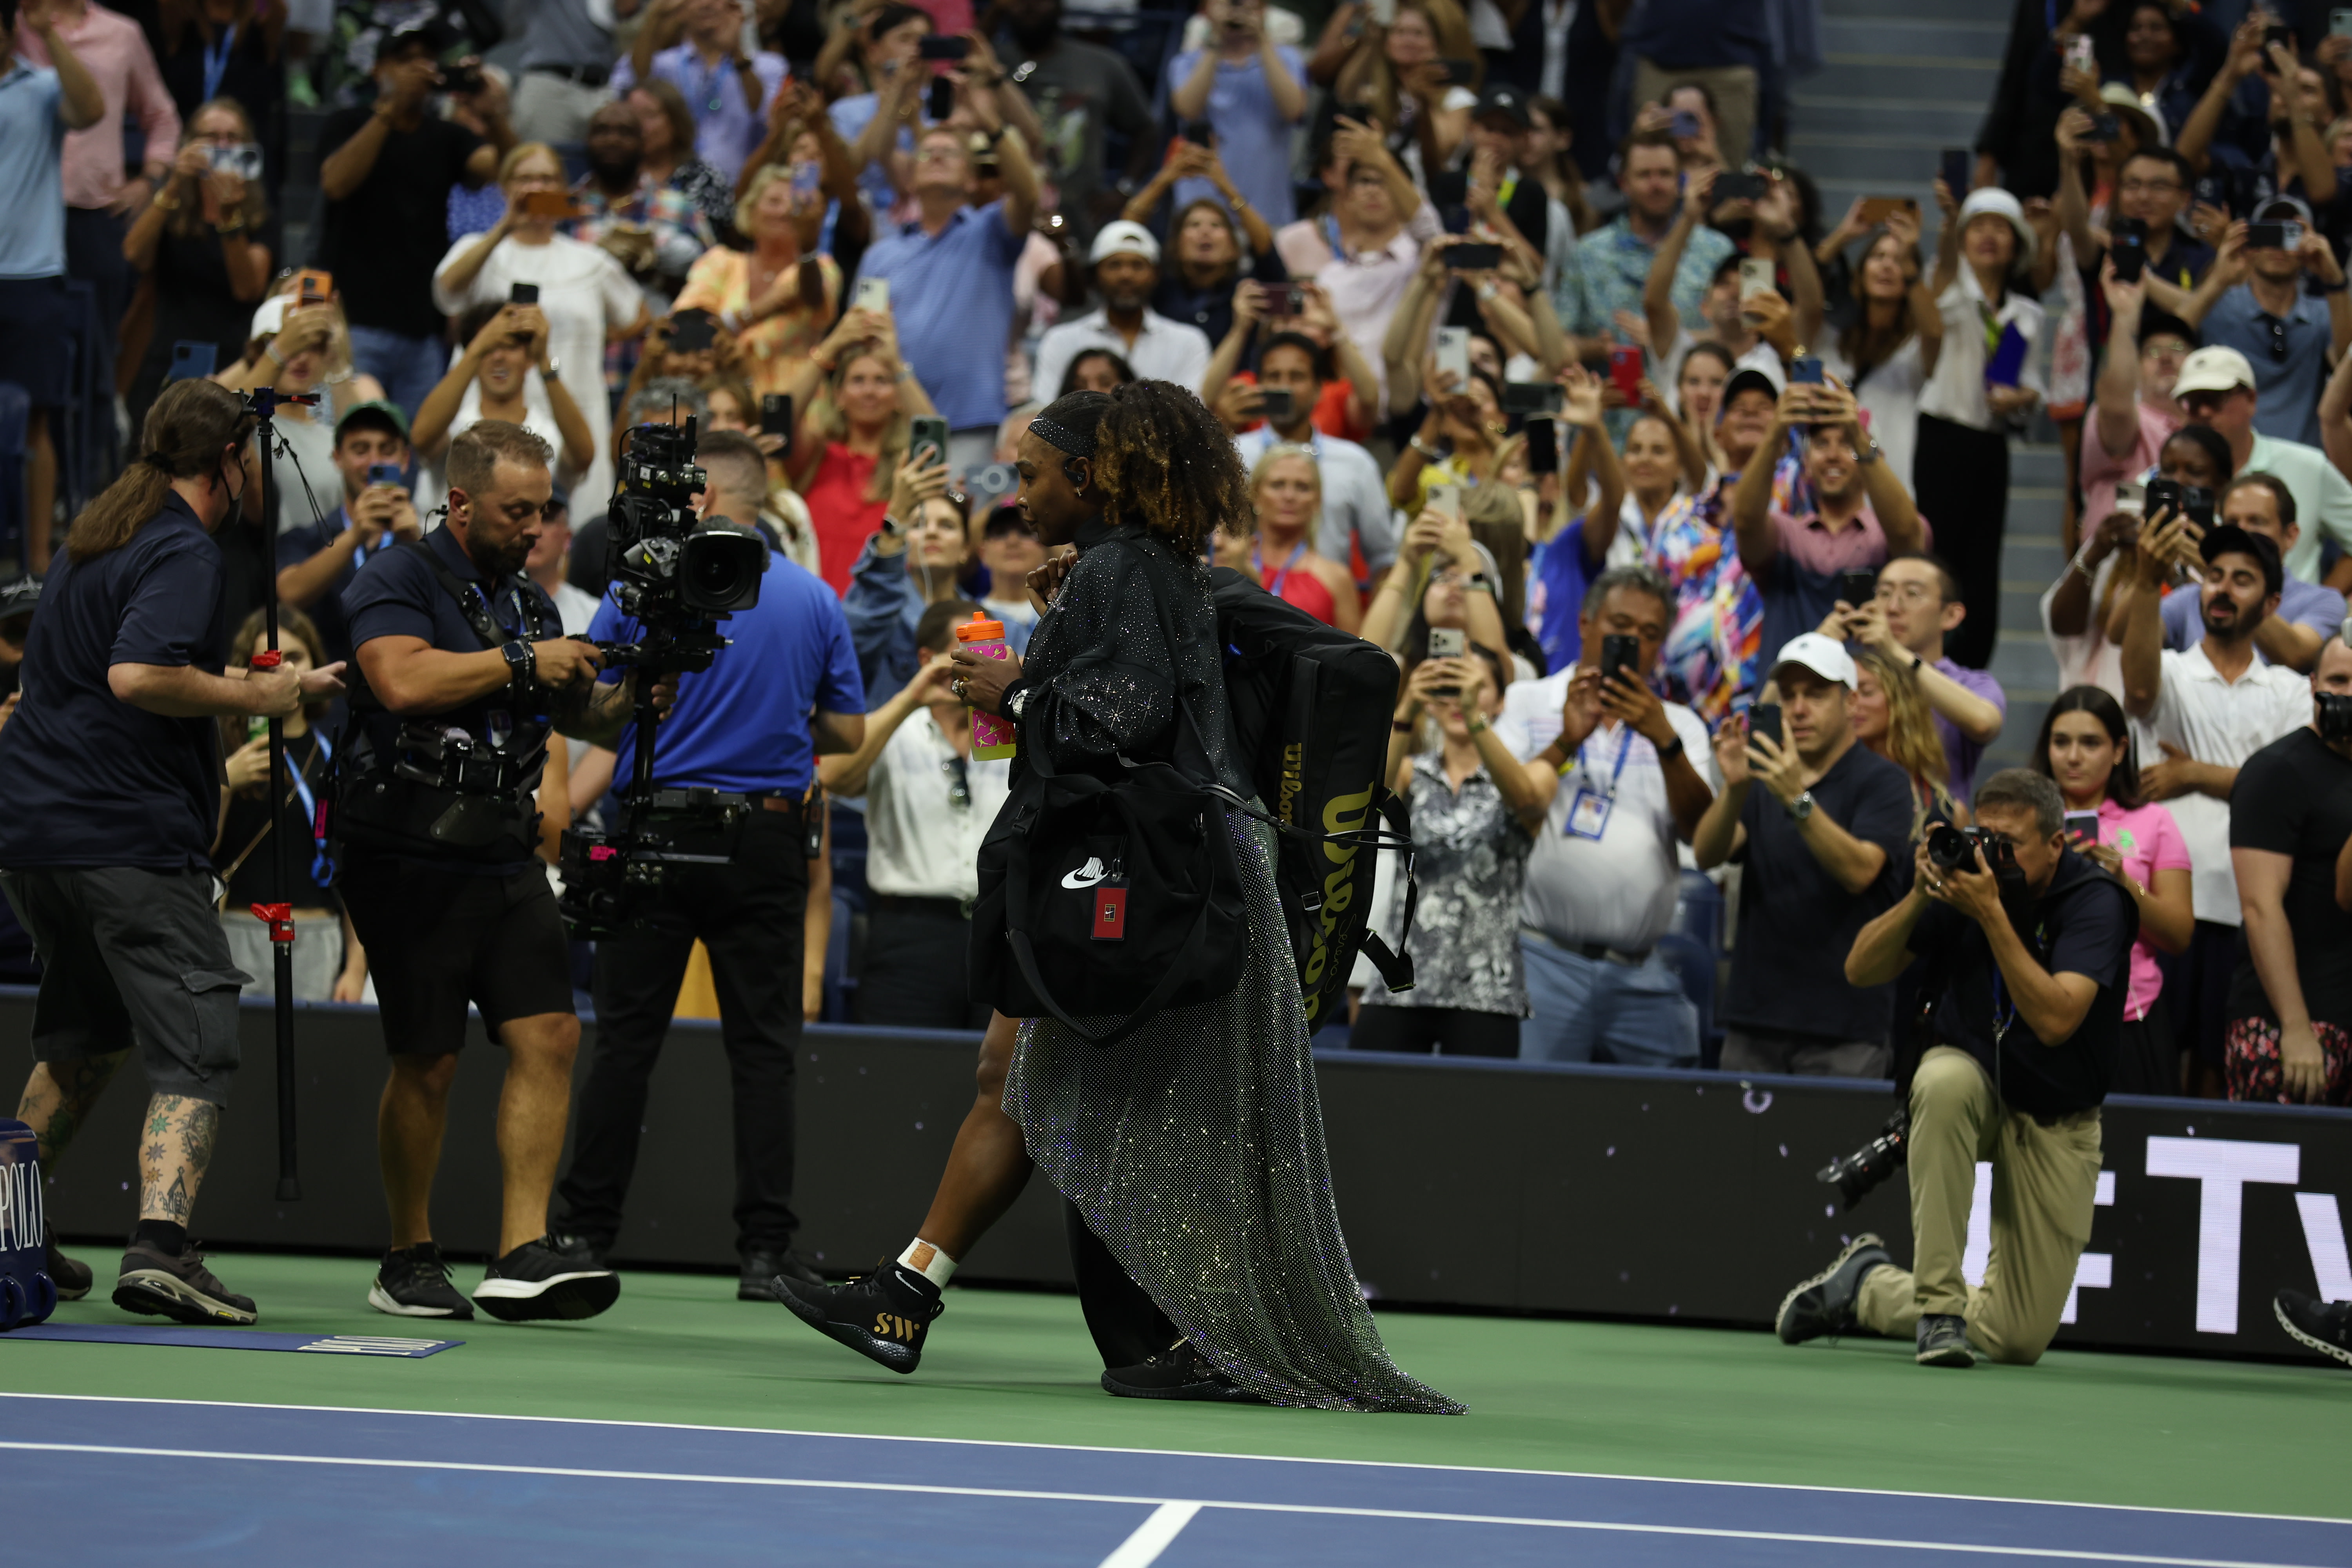 Serena Williams takes the US Open court in diamond-encrusted Nike outfit